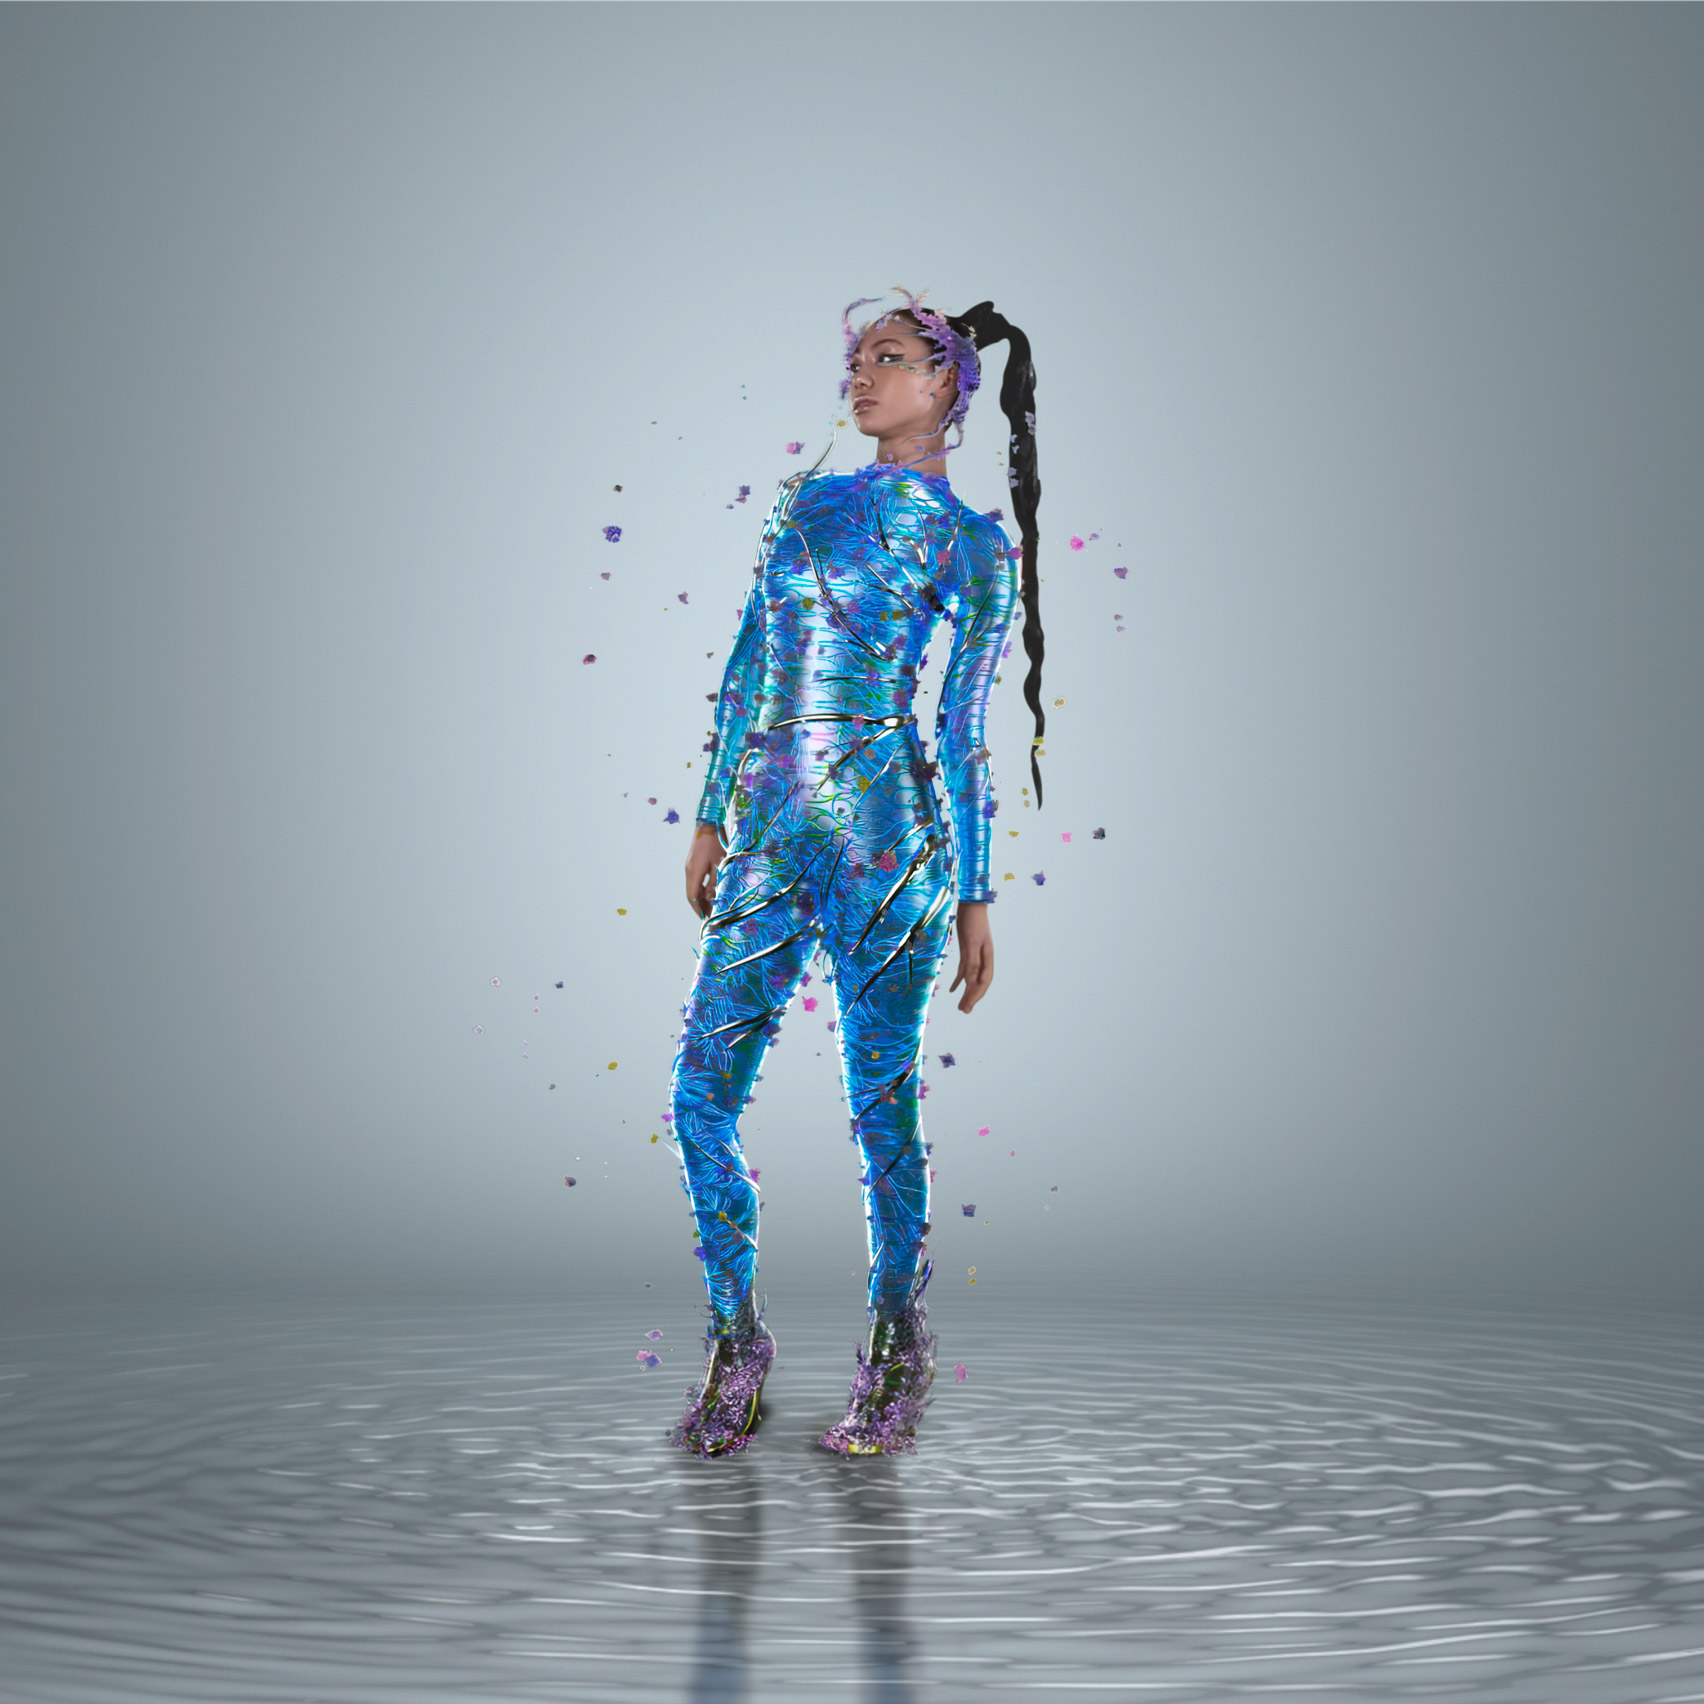 London Fashion Week 2021: World's First Fully Digital Fashion Brand  Launches New Collection